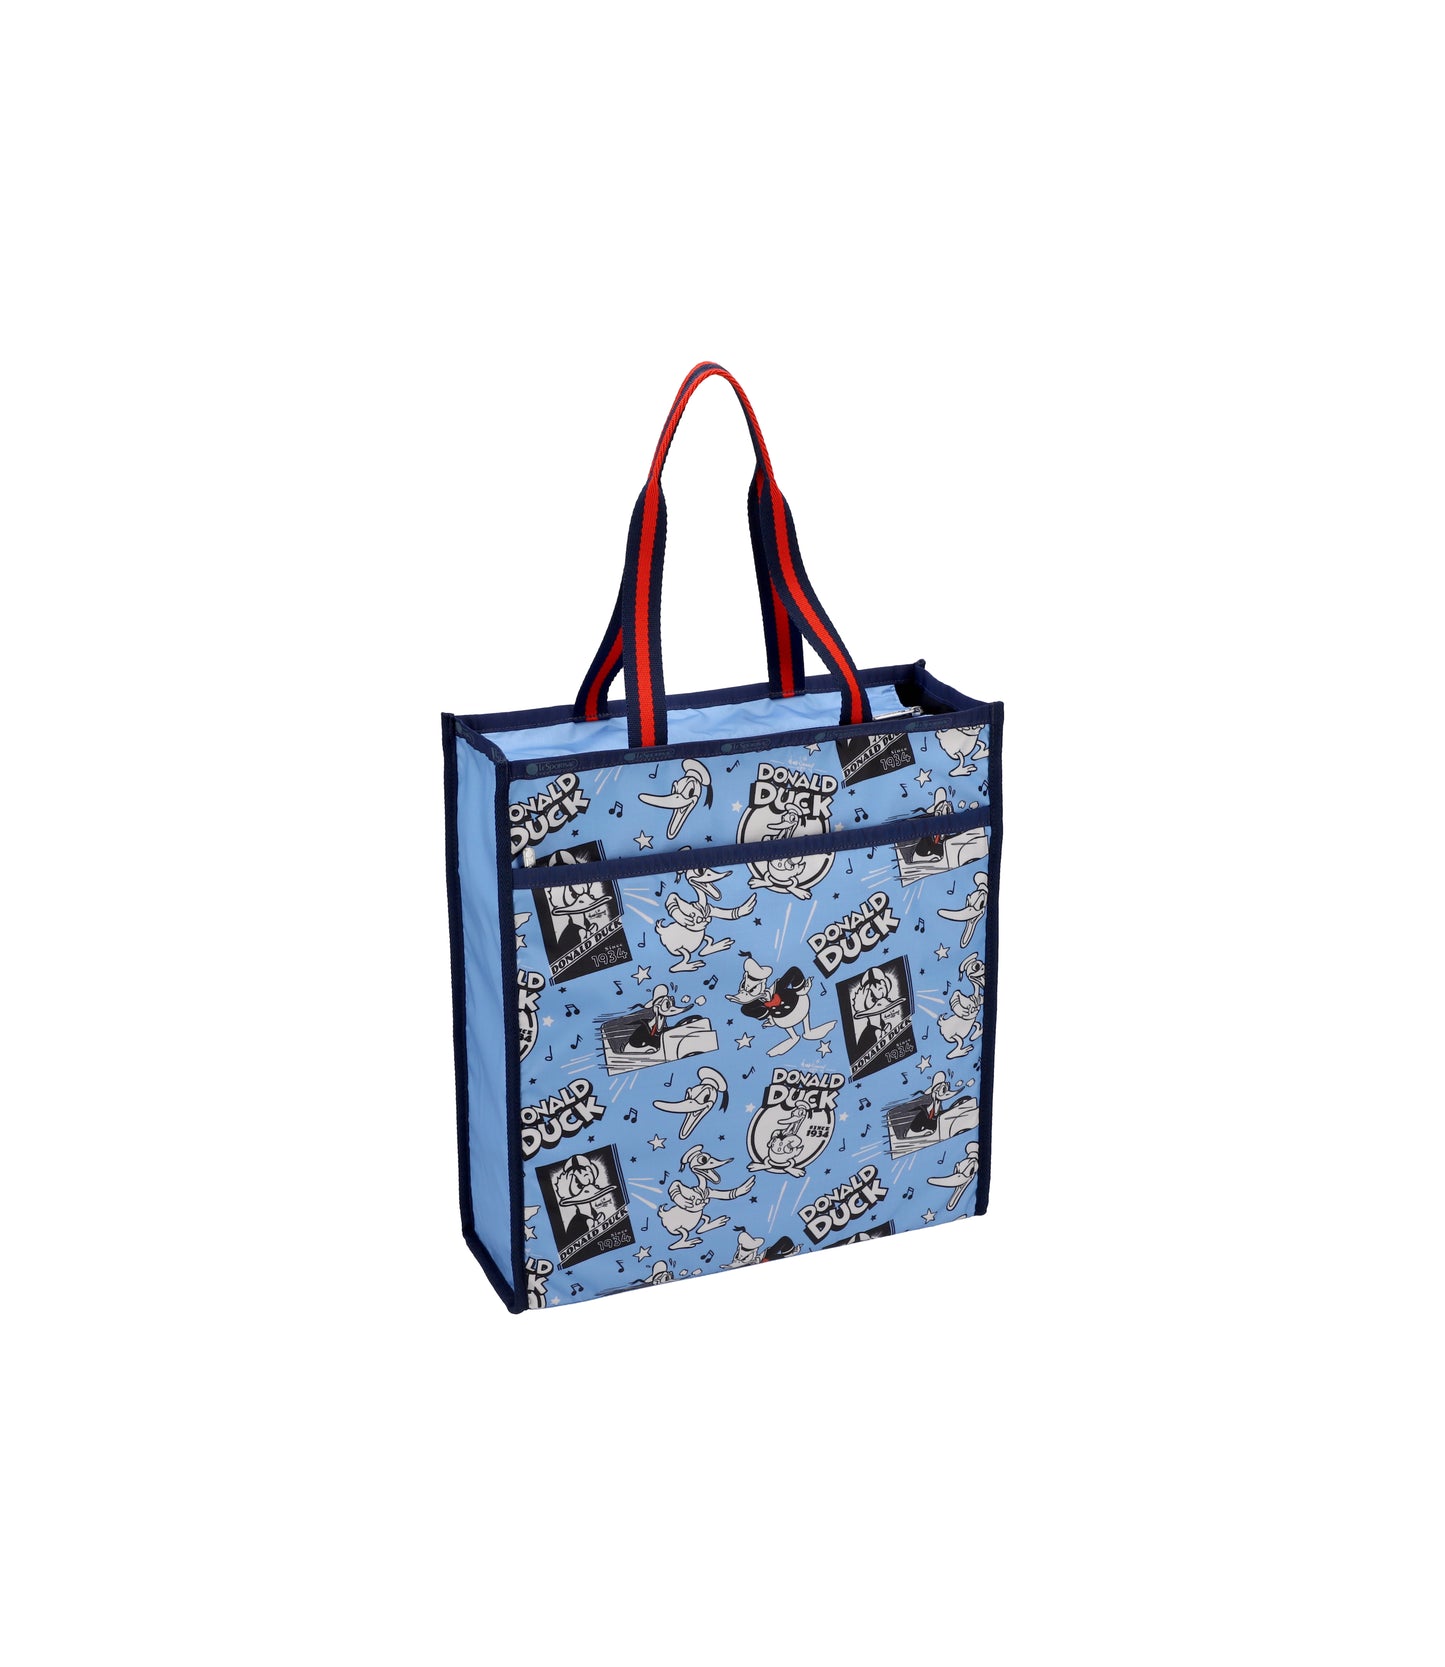 Large Book Tote<br>Disney100 Donald Duck